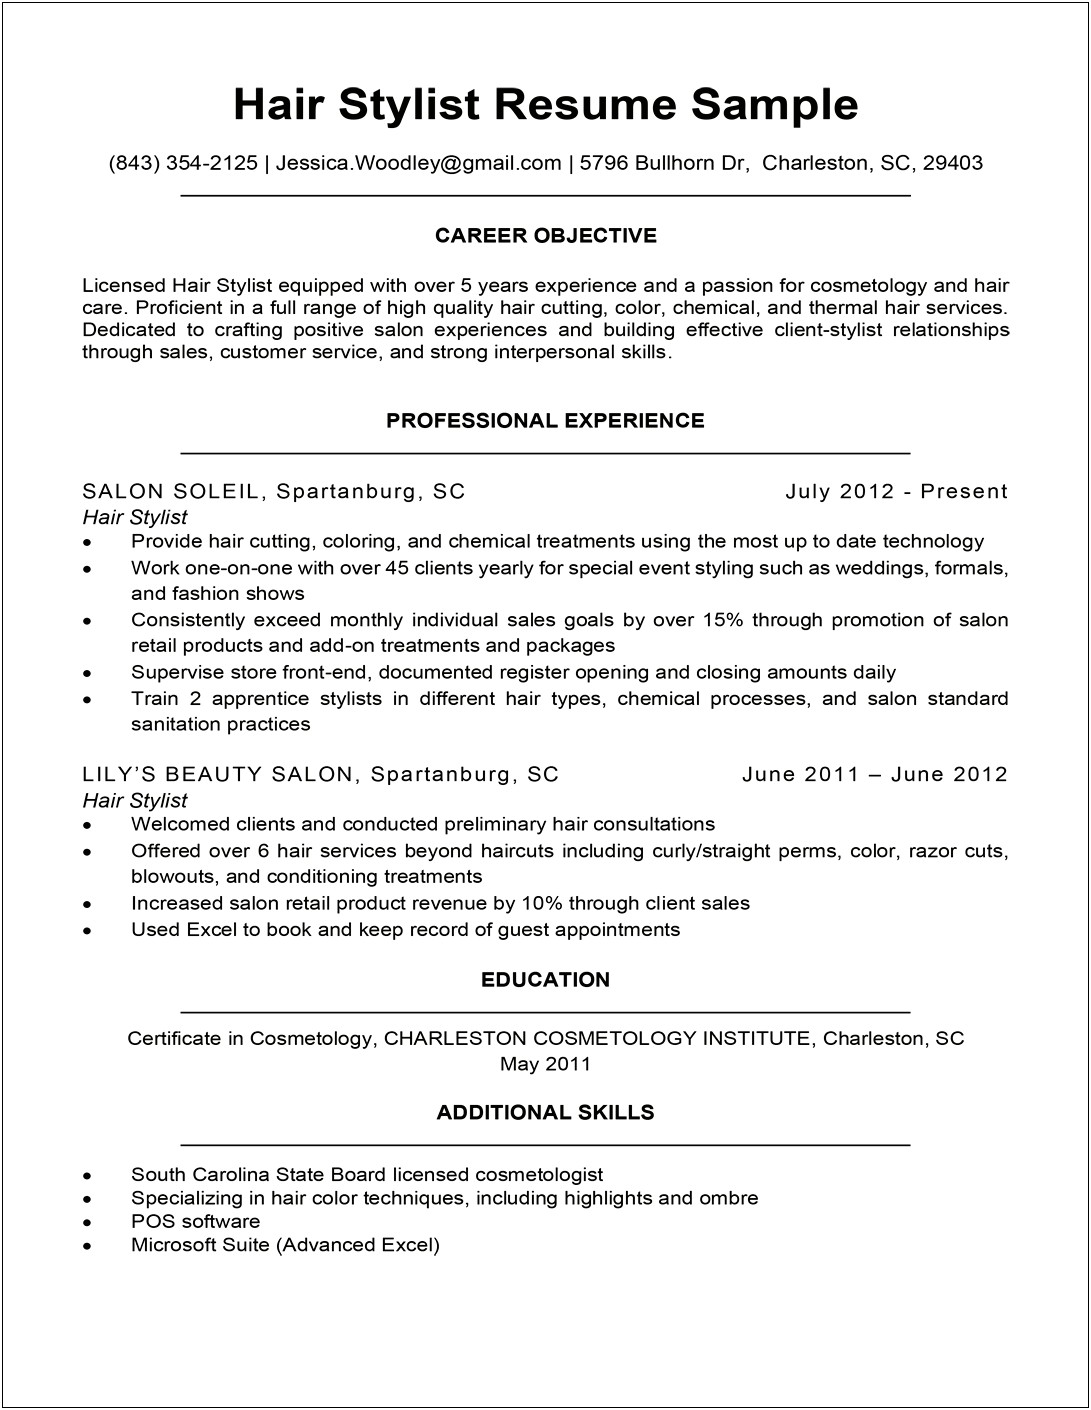 Resume Example For Hair Stylist Assistant